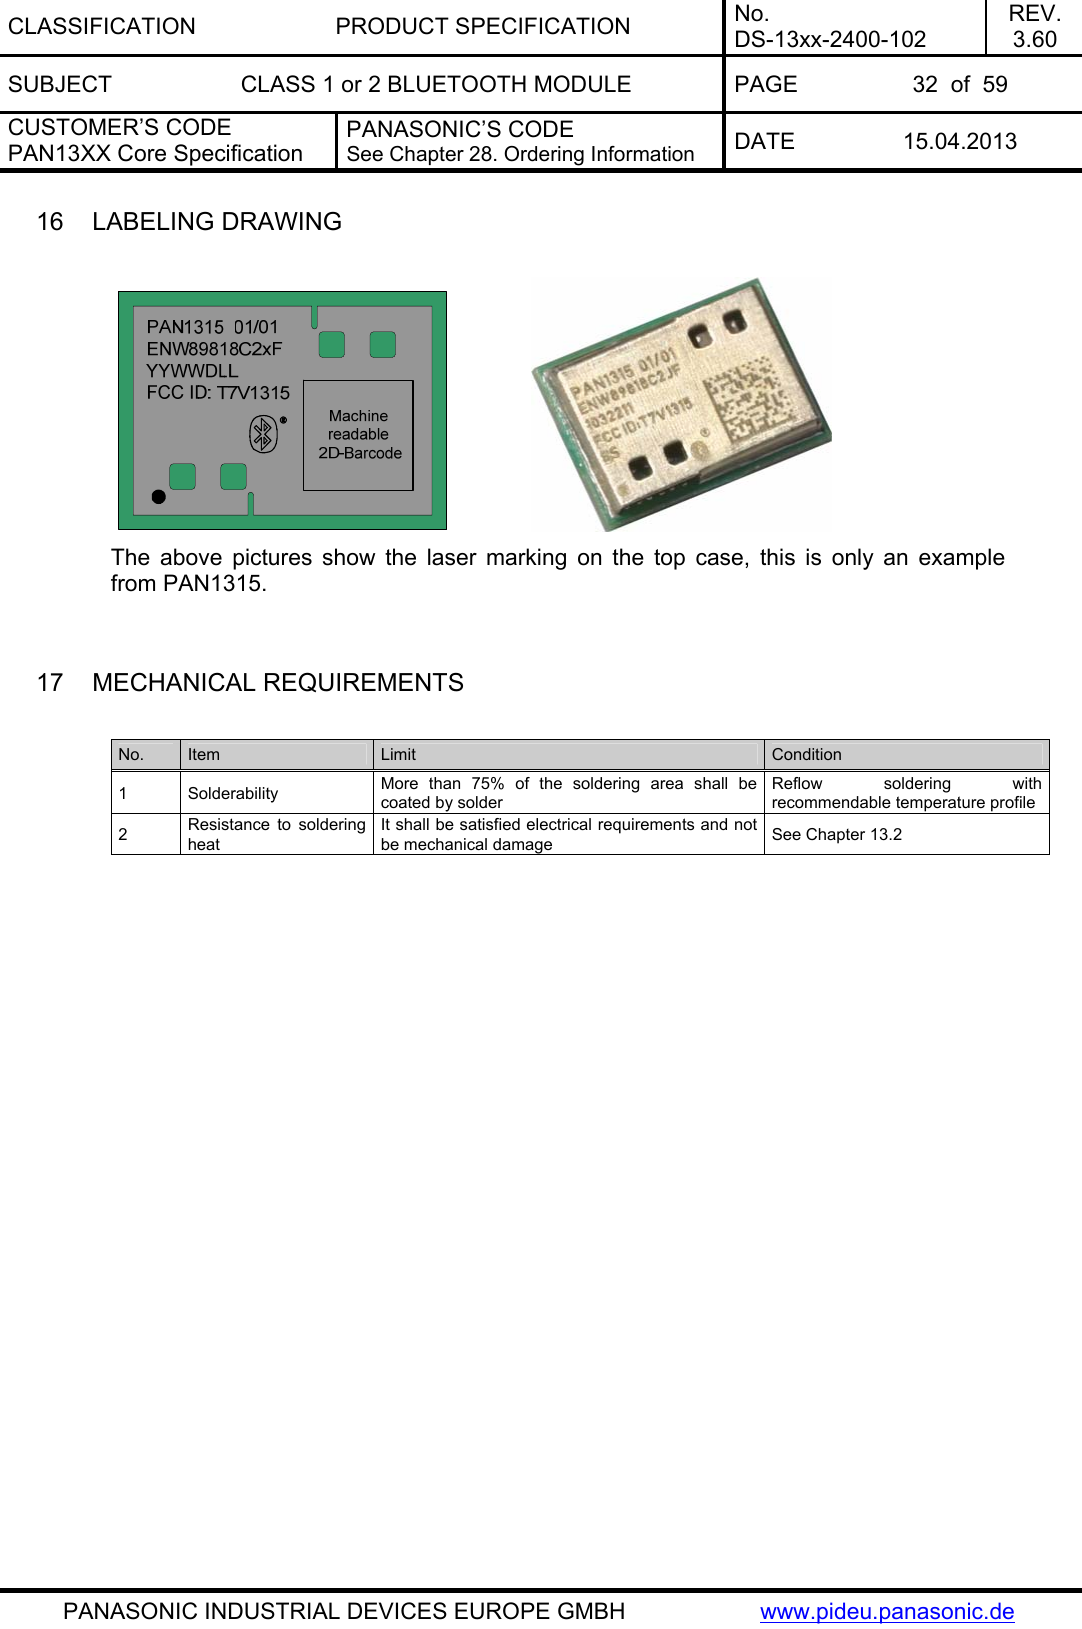 CLASSIFICATION PRODUCT SPECIFICATION No. DS-13xx-2400-102 REV. 3.60 SUBJECT  CLASS 1 or 2 BLUETOOTH MODULE  PAGE  32  of  59 CUSTOMER’S CODE PAN13XX Core Specification PANASONIC’S CODE See Chapter 28. Ordering Information  DATE 15.04.2013   PANASONIC INDUSTRIAL DEVICES EUROPE GMBH  www.pideu.panasonic.de 16  LABELING DRAWING                The above pictures show the laser marking on the top case, this is only an example from PAN1315.   17  MECHANICAL REQUIREMENTS  No.  Item  Limit  Condition 1 Solderability  More than 75% of the soldering area shall be coated by solder Reflow soldering with recommendable temperature profile 2  Resistance to soldering heat It shall be satisfied electrical requirements and not be mechanical damage  See Chapter 13.2  